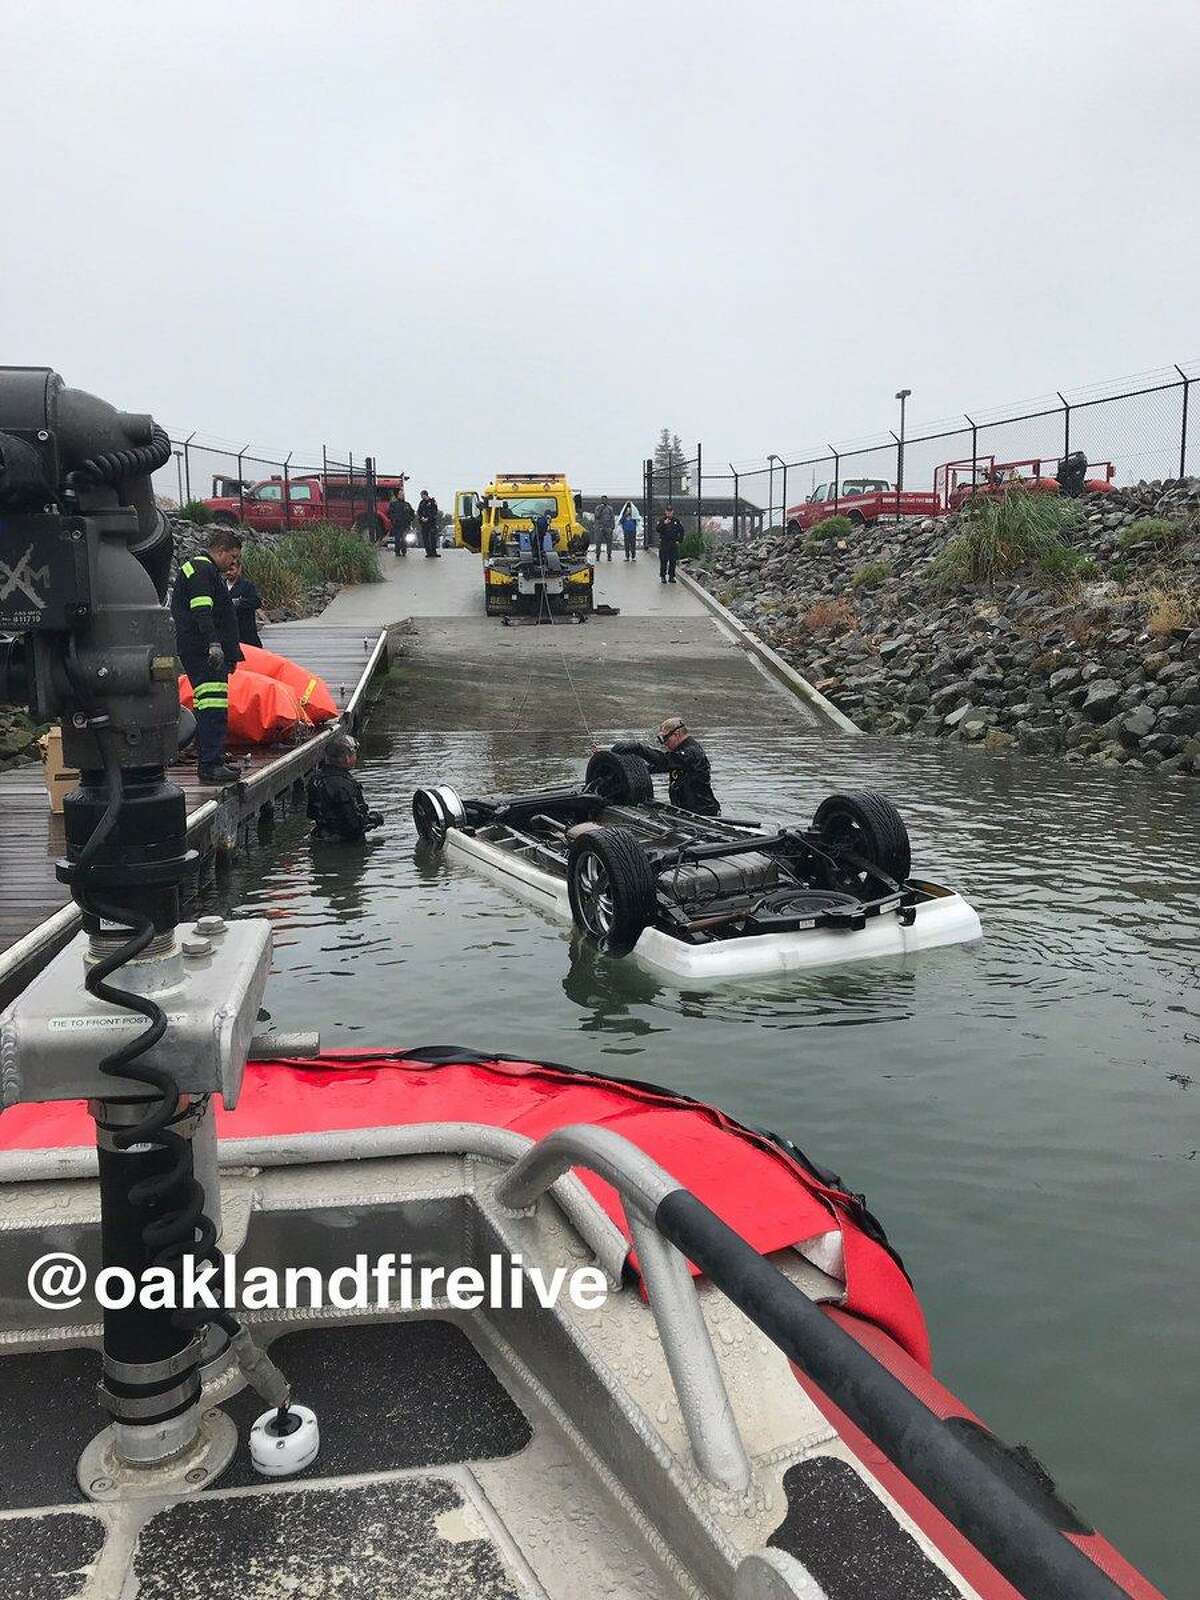 The man who died after driving into the Oakland Estuary on Sunday was identified as a Alameda resident, authorities said.